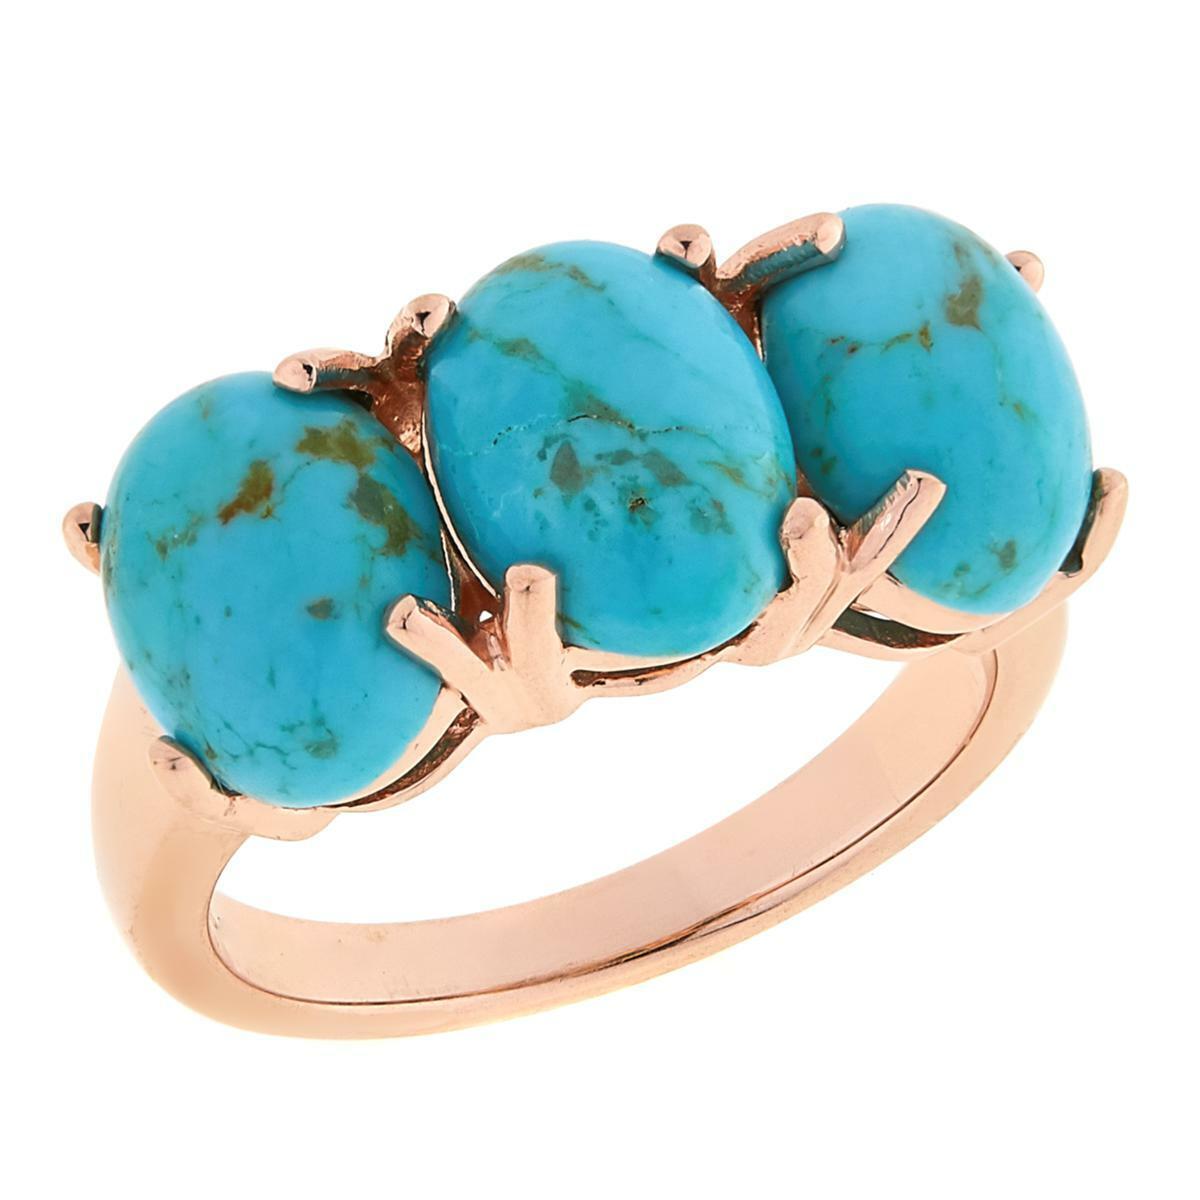 Paul Deasy Gem Rose Gold Plated 3-Stone Kingman Turquoise Ring Size 7 Hsn $101